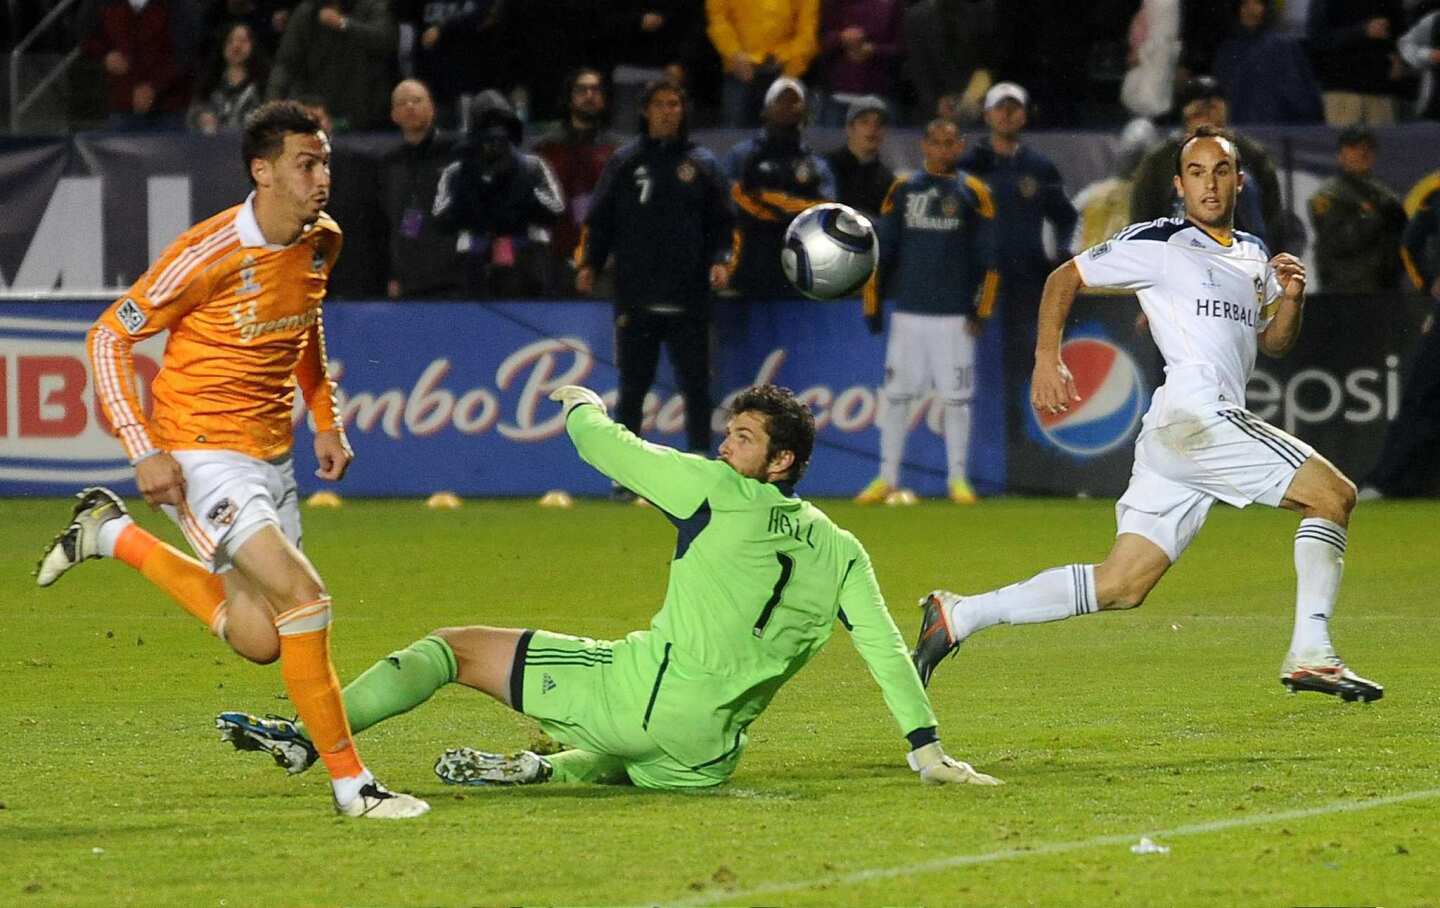 Galaxy midfielder Landon Donovan shoots the ball over Dynamo goalie Tally Hall to score the game-winning goal in the MLS Championship at the Home Depot Center in November. AEG owns both teams.